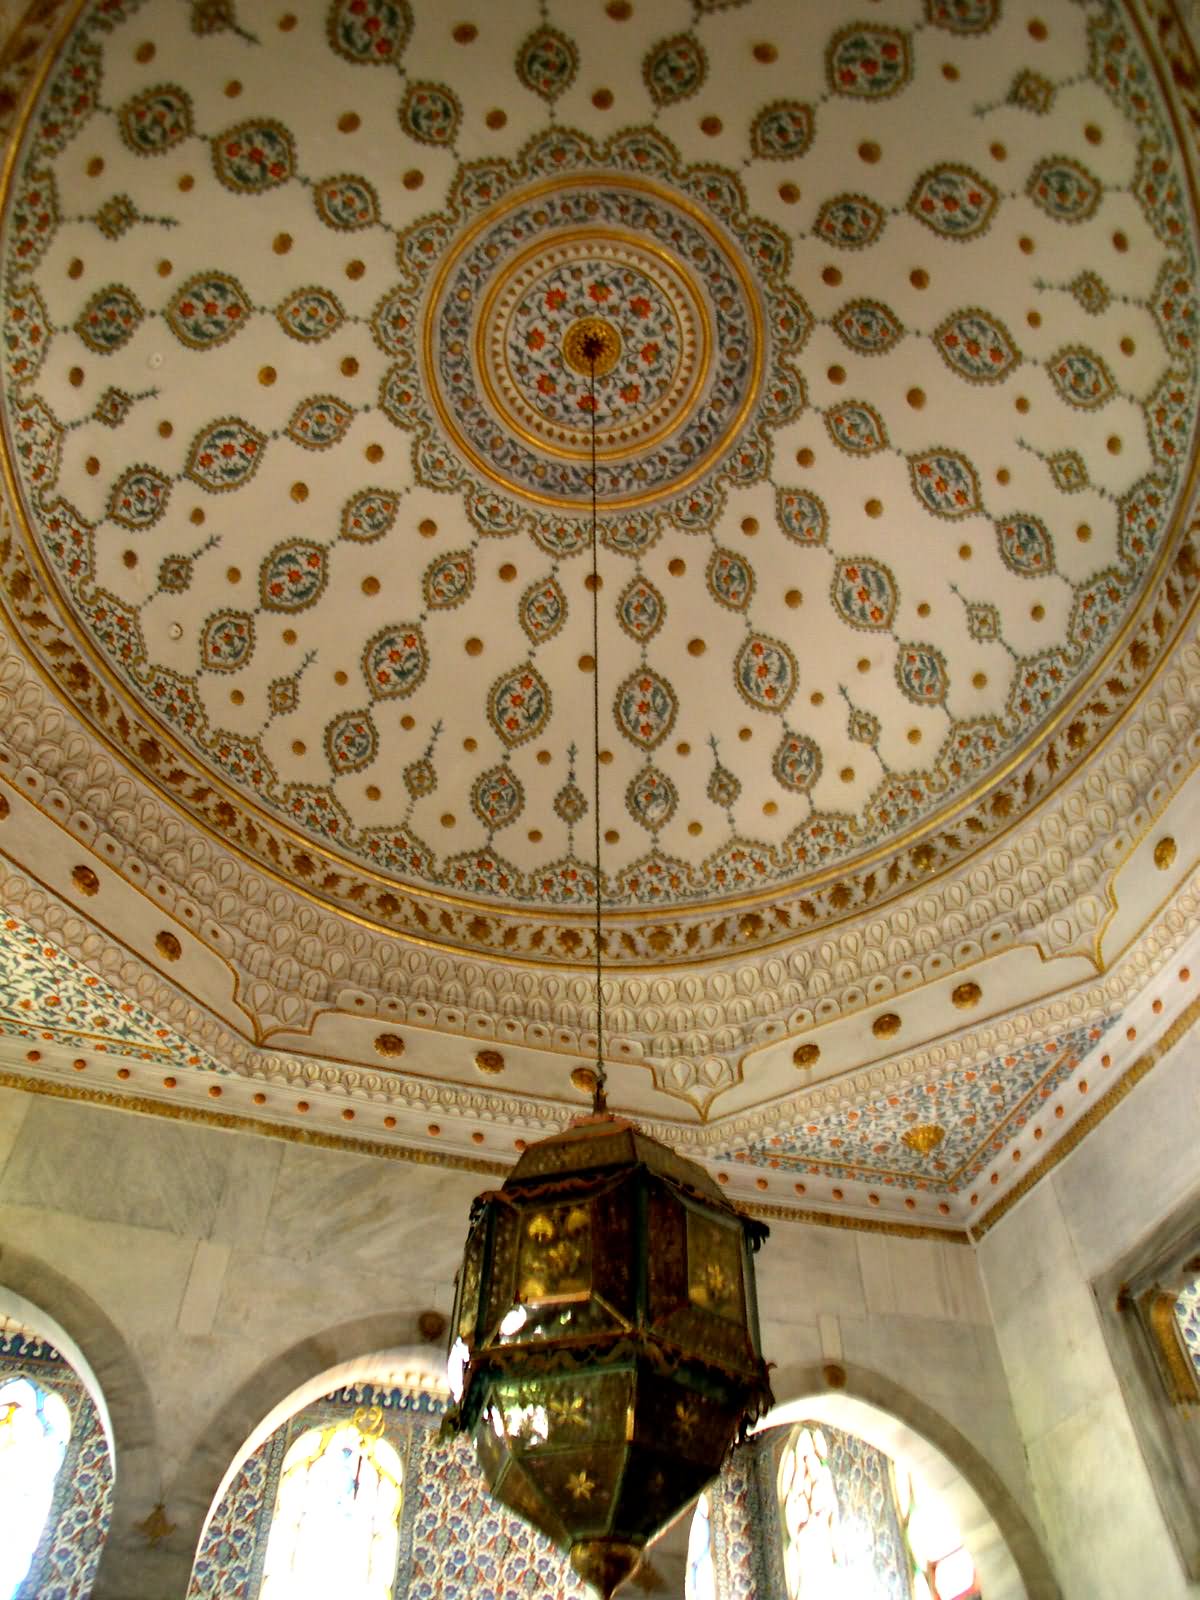 Adorable Ceiling Architecture And Hanging Lantern Inside The Topkapi Palace